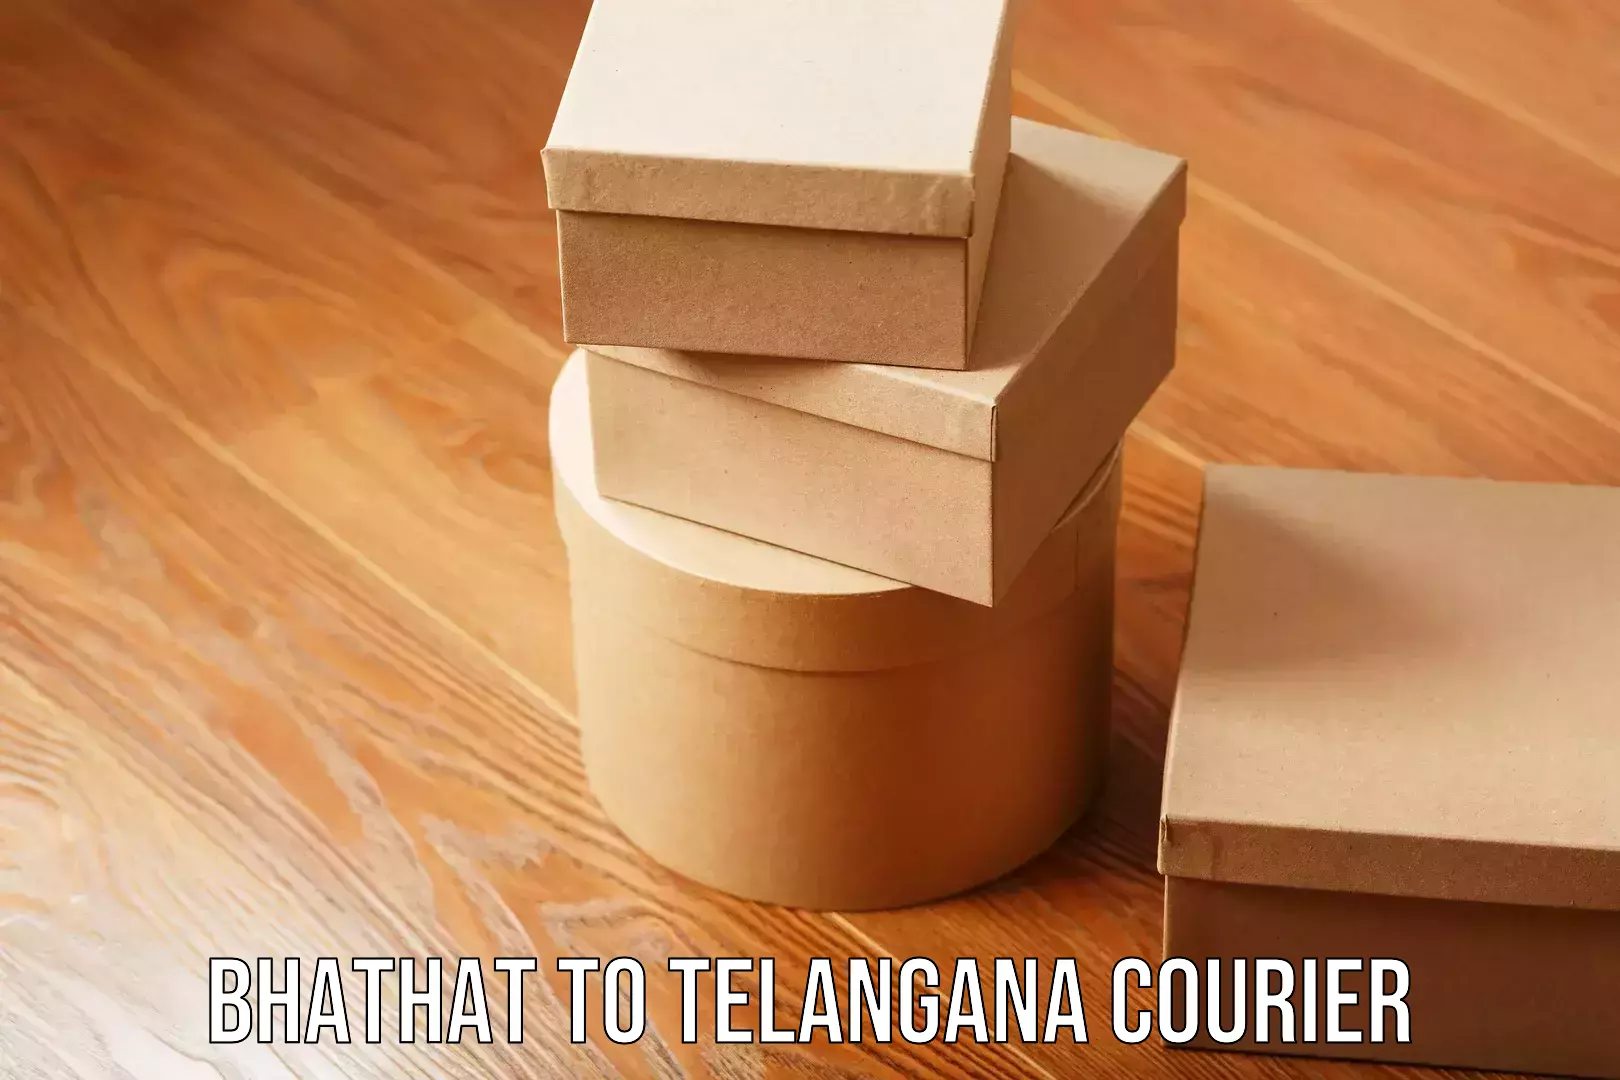 Courier service comparison in Bhathat to Telangana